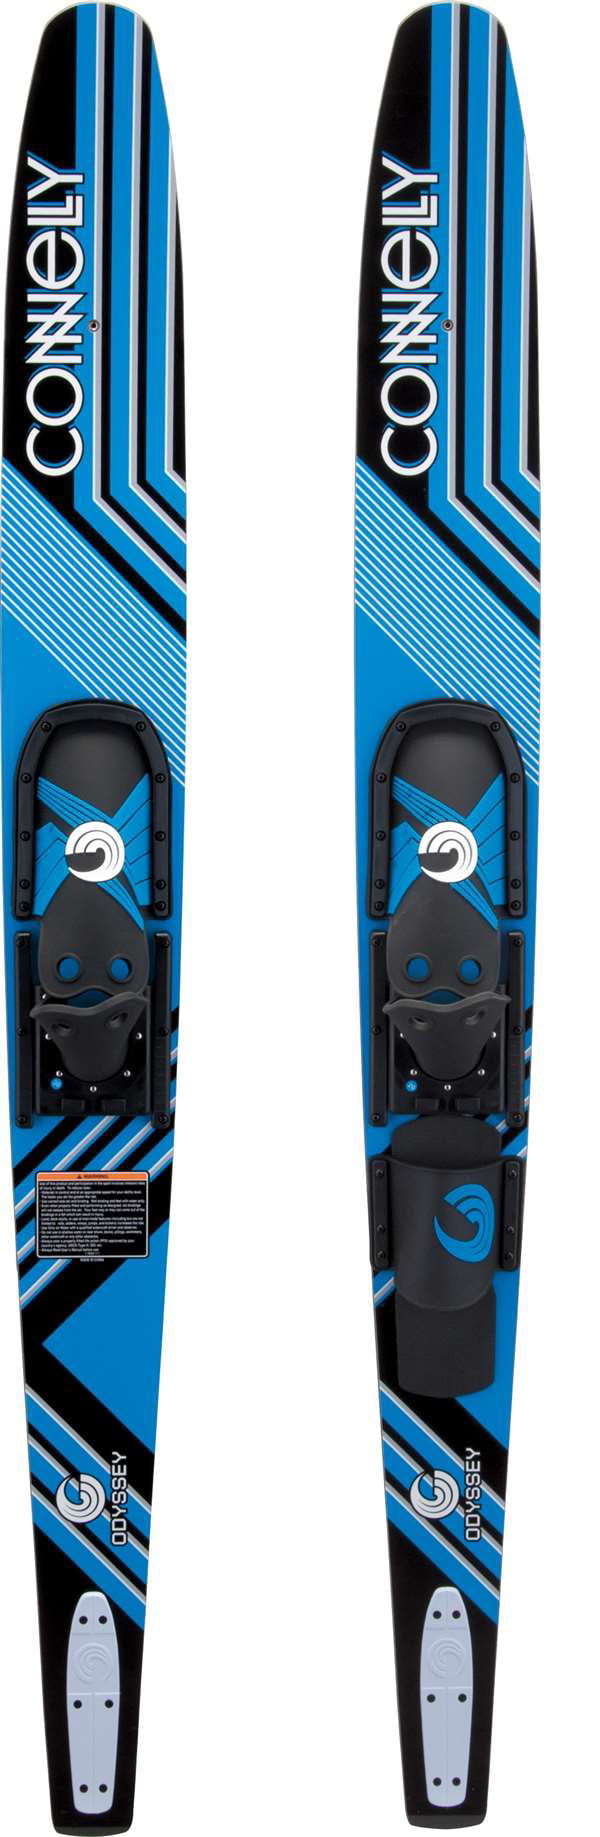 Adjustable Bindings Connelly Odyssey Waterski Combos 68 